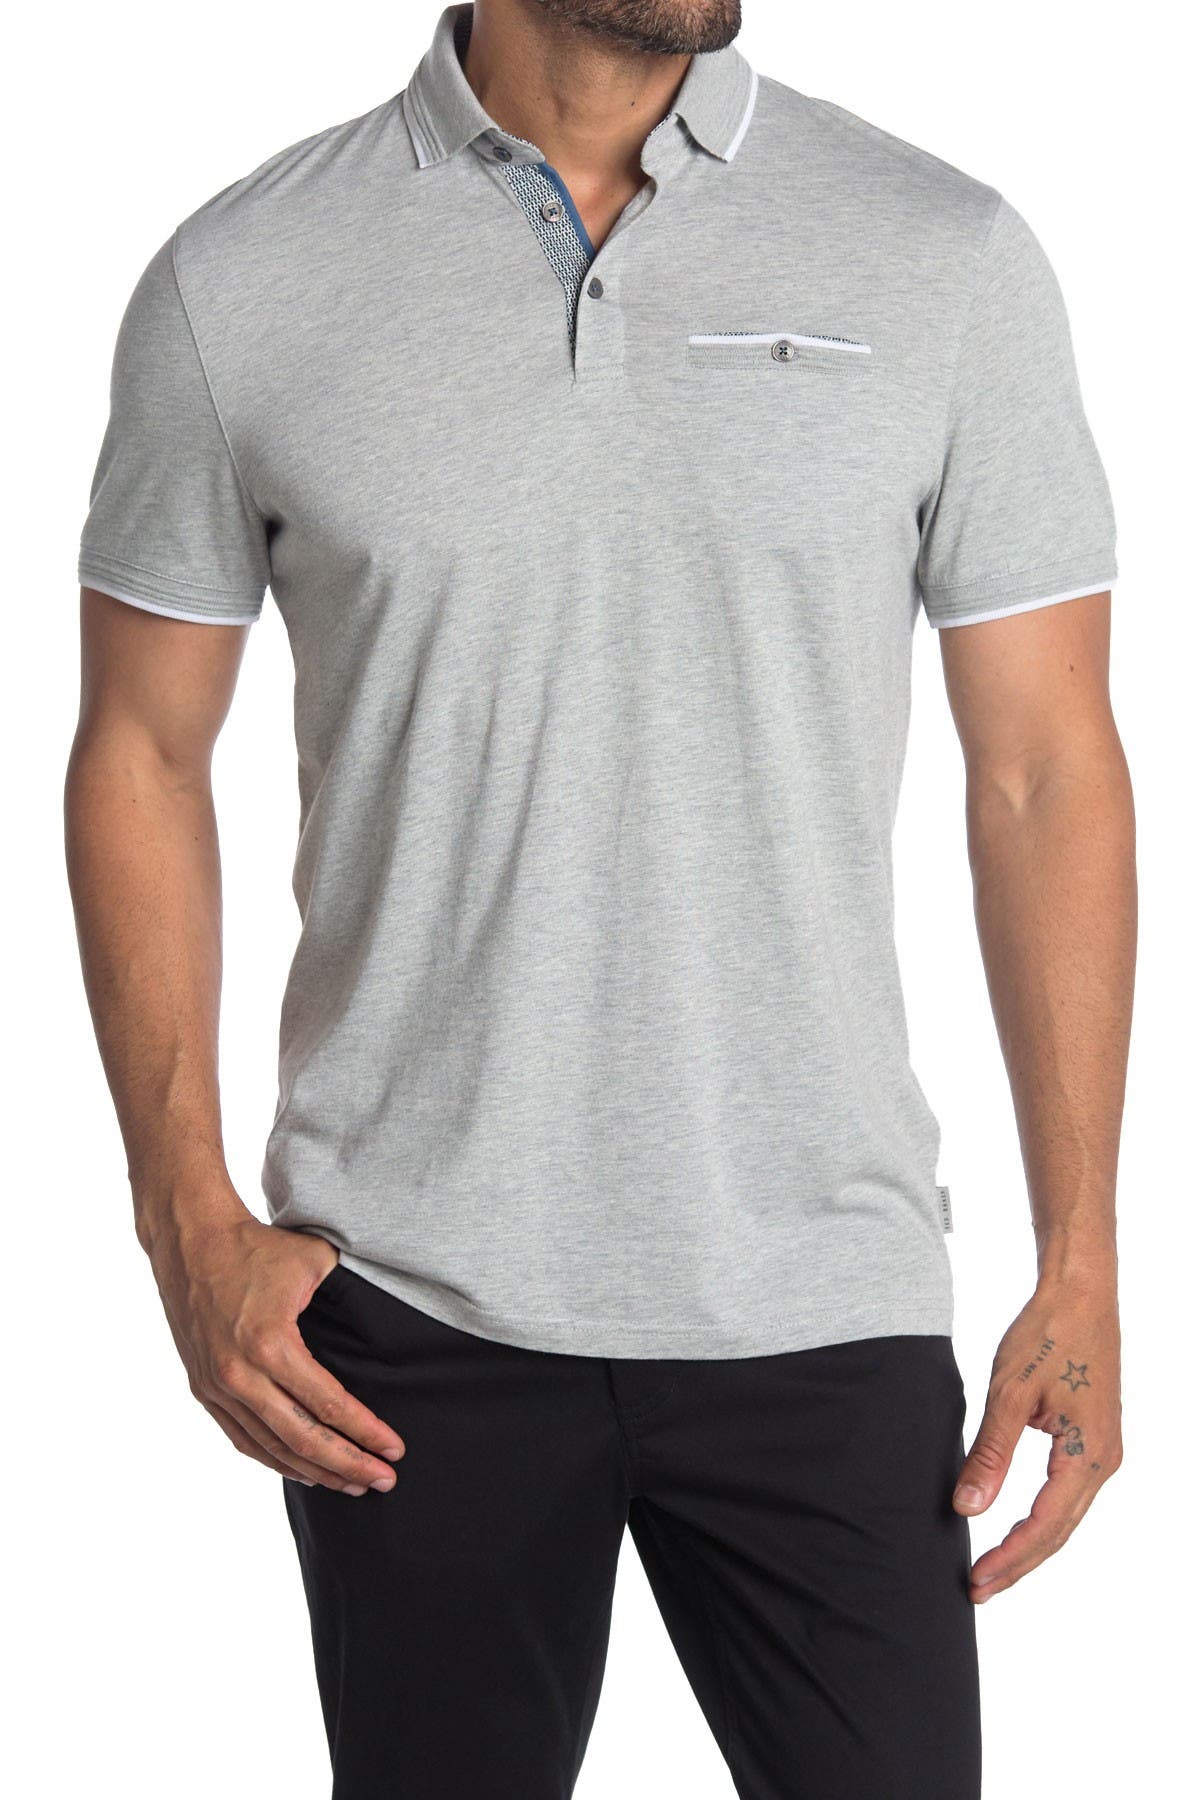 Ted Baker London | Derry Flat Knit Polo Shirt | Nordstrom Rack